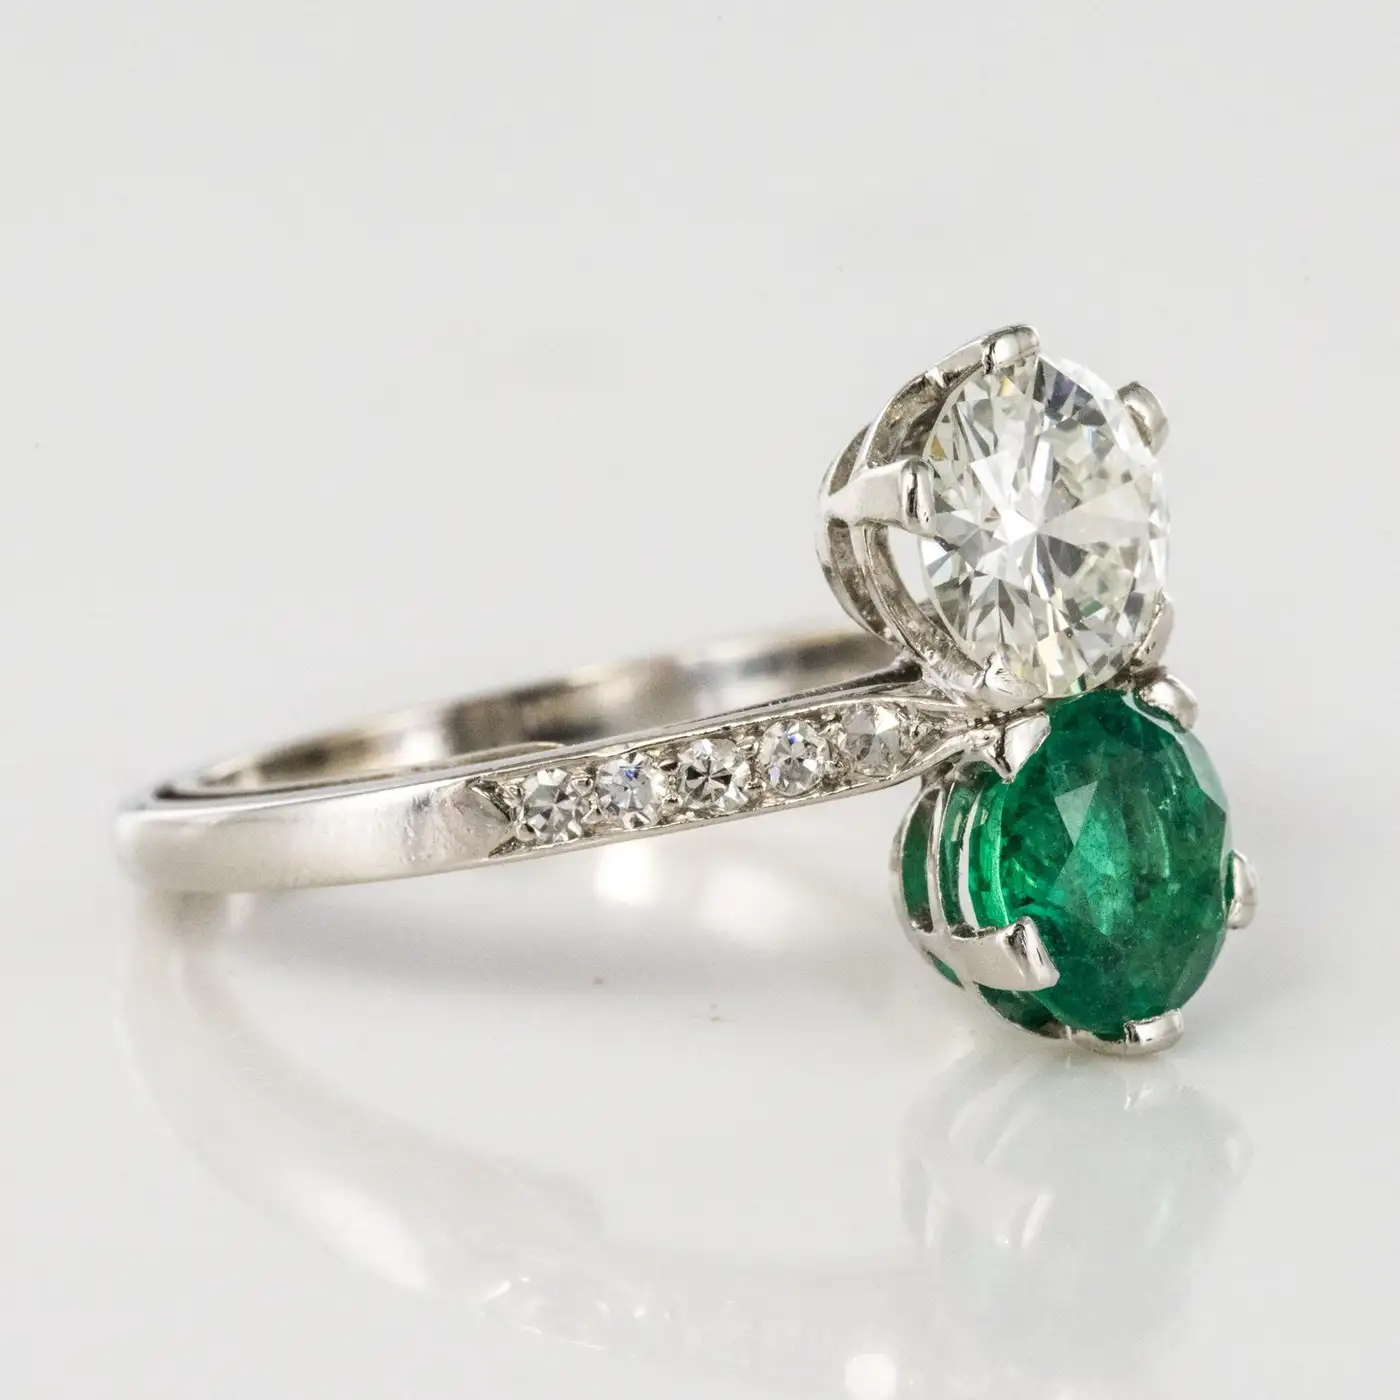 1930s-French-Platinum-Art-Deco-Emerald-Diamond-You-and-Me-Ring-10.webp